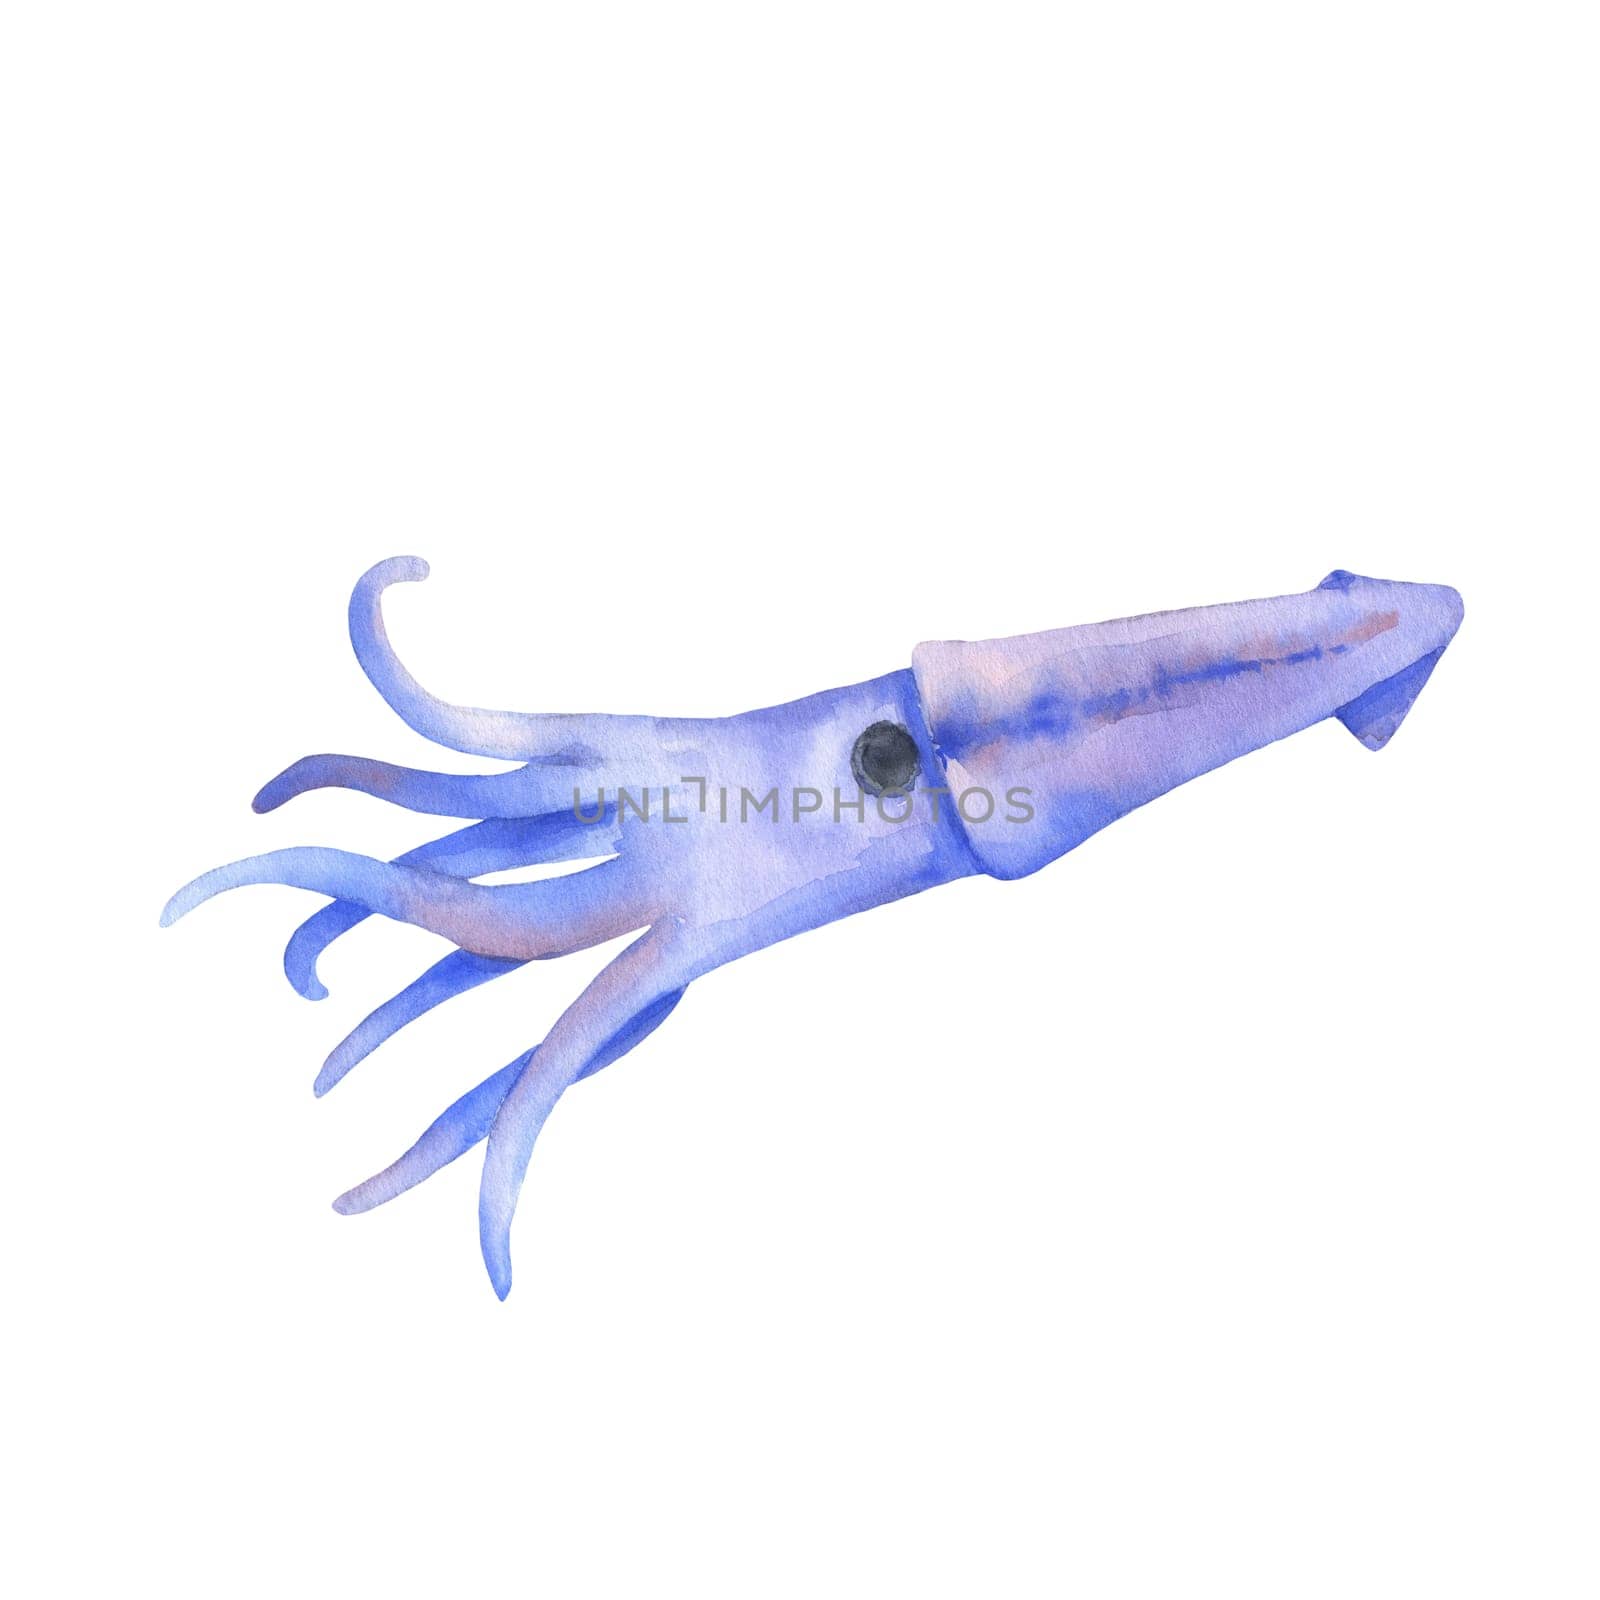 Watercolor illustration sweeming squid isolated on white.